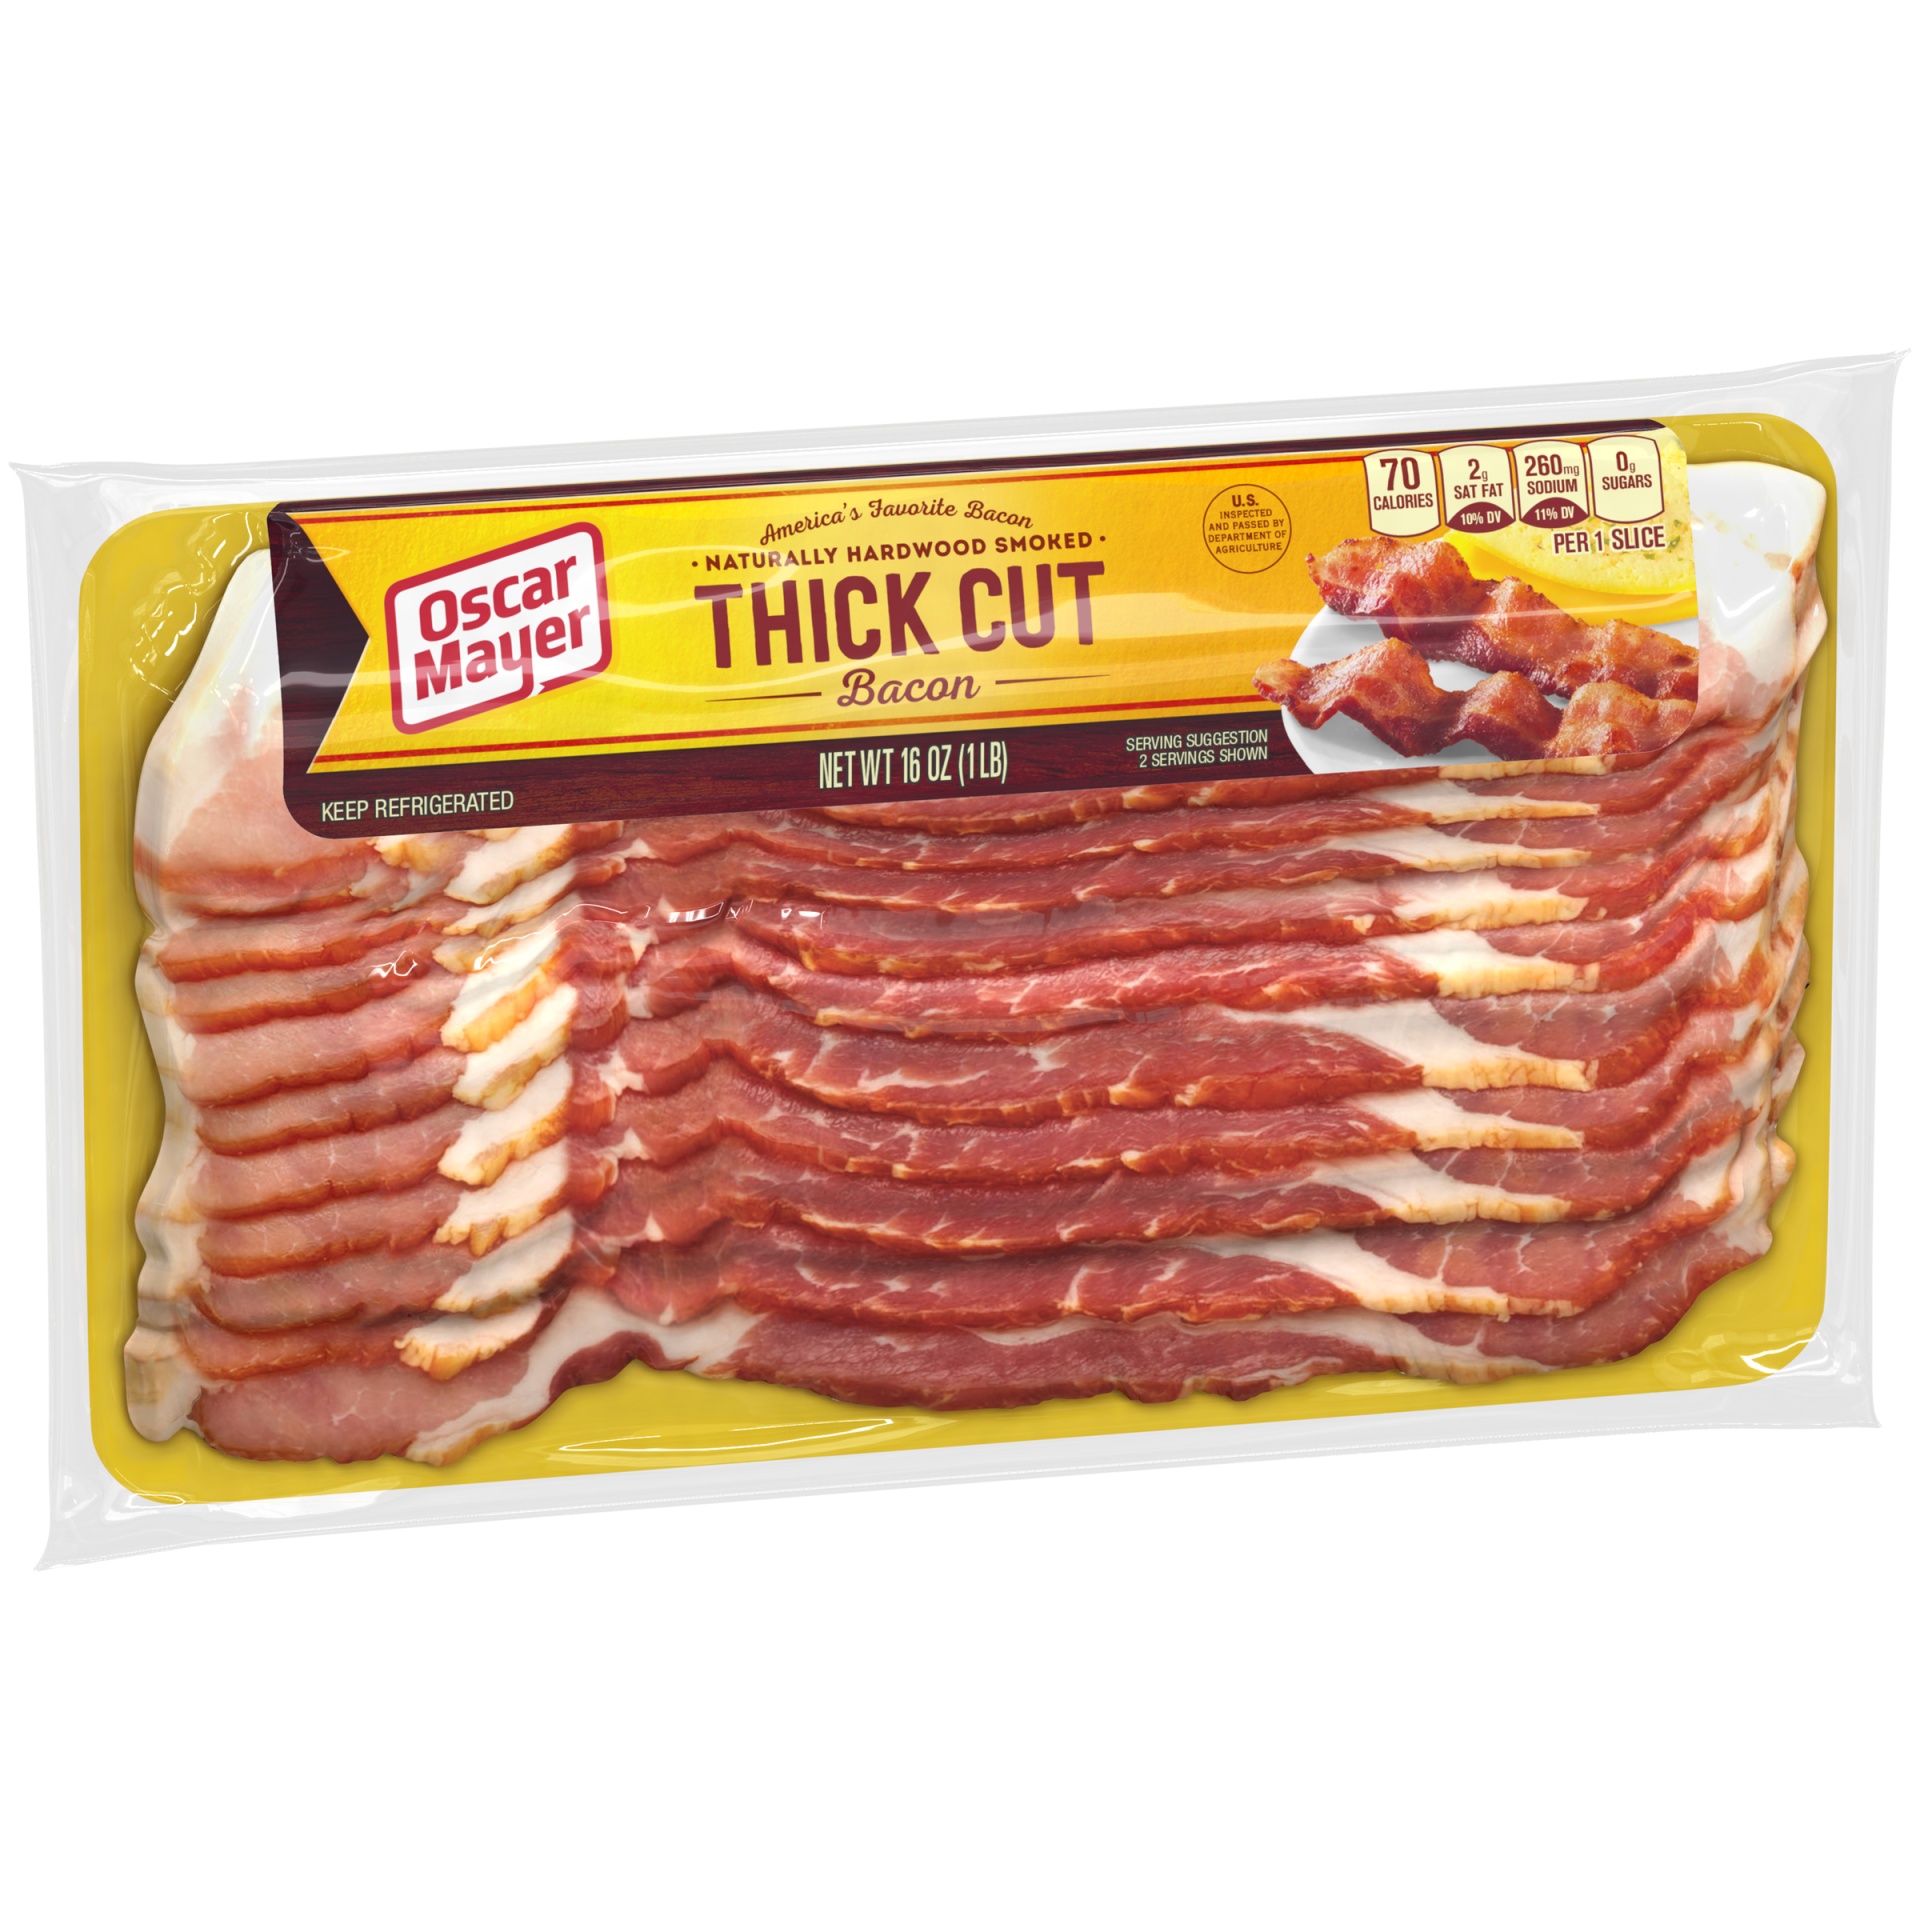 slide 9 of 12, Oscar Mayer Naturally Hardwood Smoked Thick Cut Bacon Pack, 11-13 slices, 16 oz